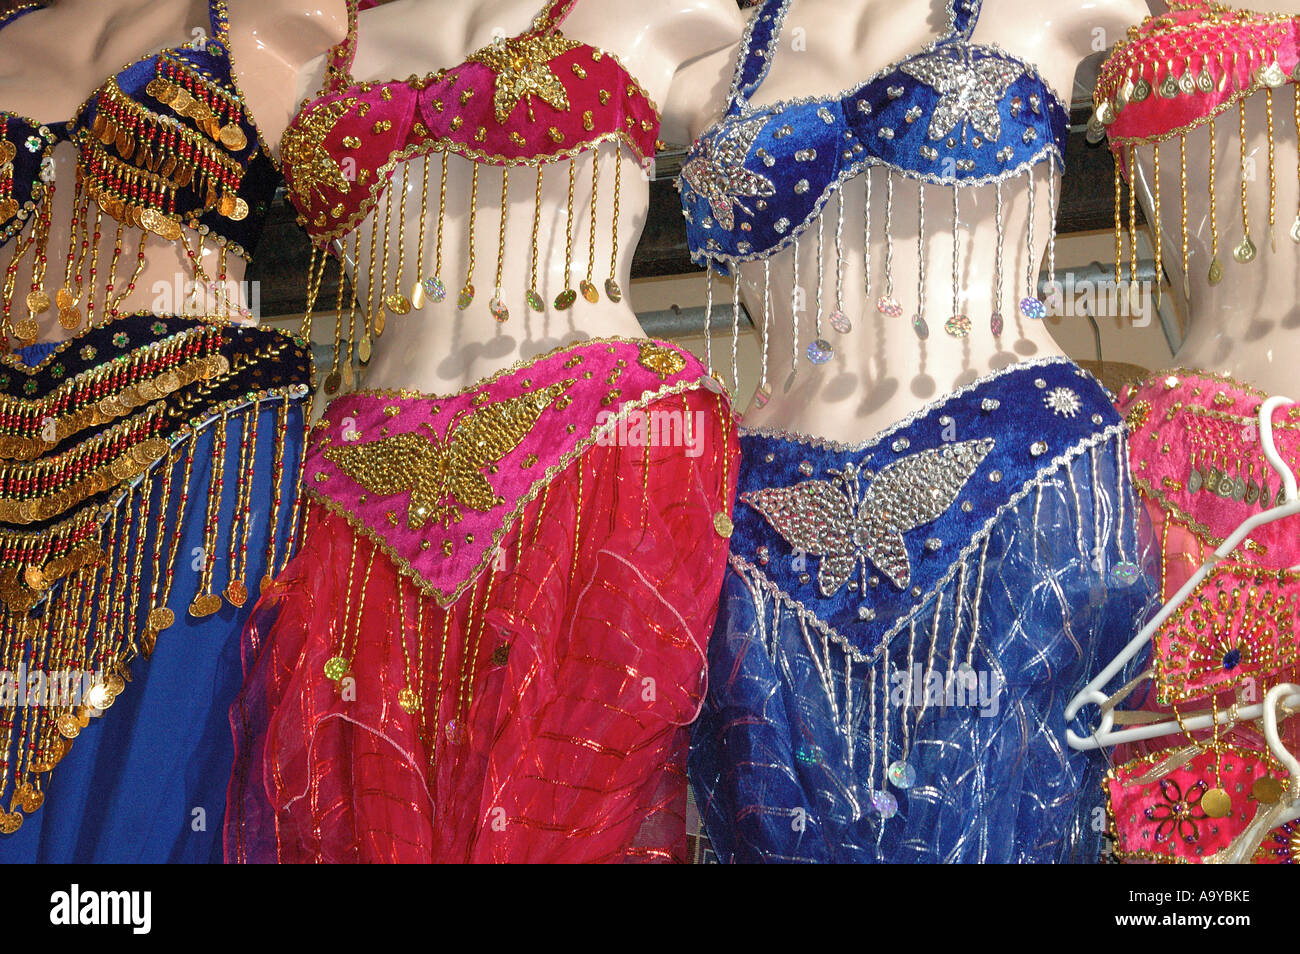 belly dancing outfits for sale